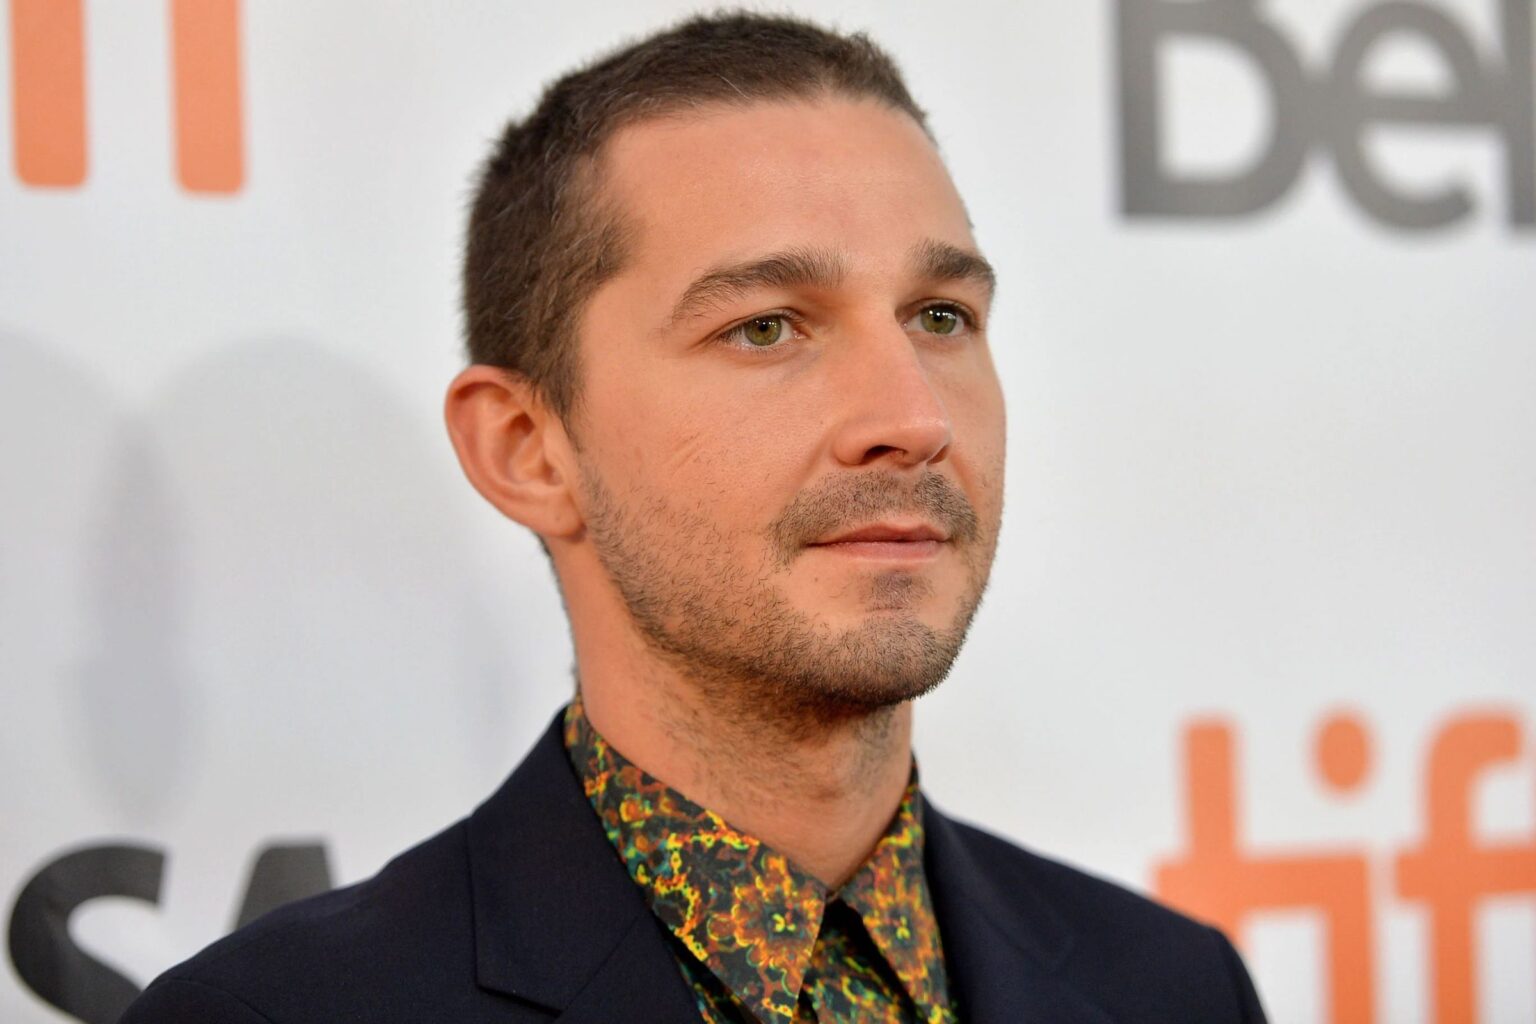 So is there really reason to believe there's a new priest in town? Ask Shia La Beouf and the answer is...himself?!